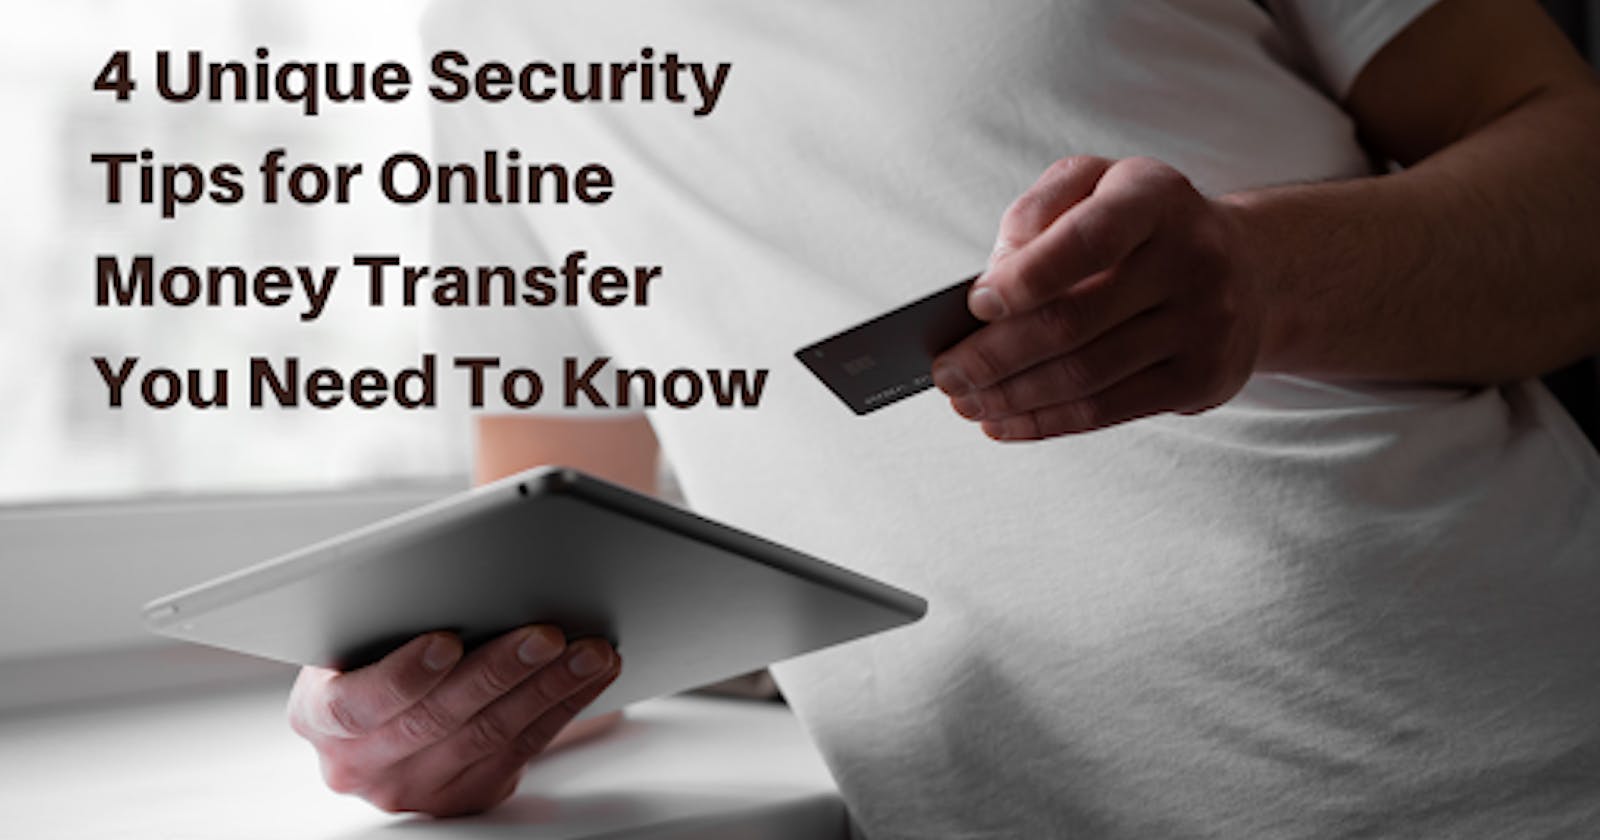 4 Unique Security Tips for Online Money Transfer You Need To Know